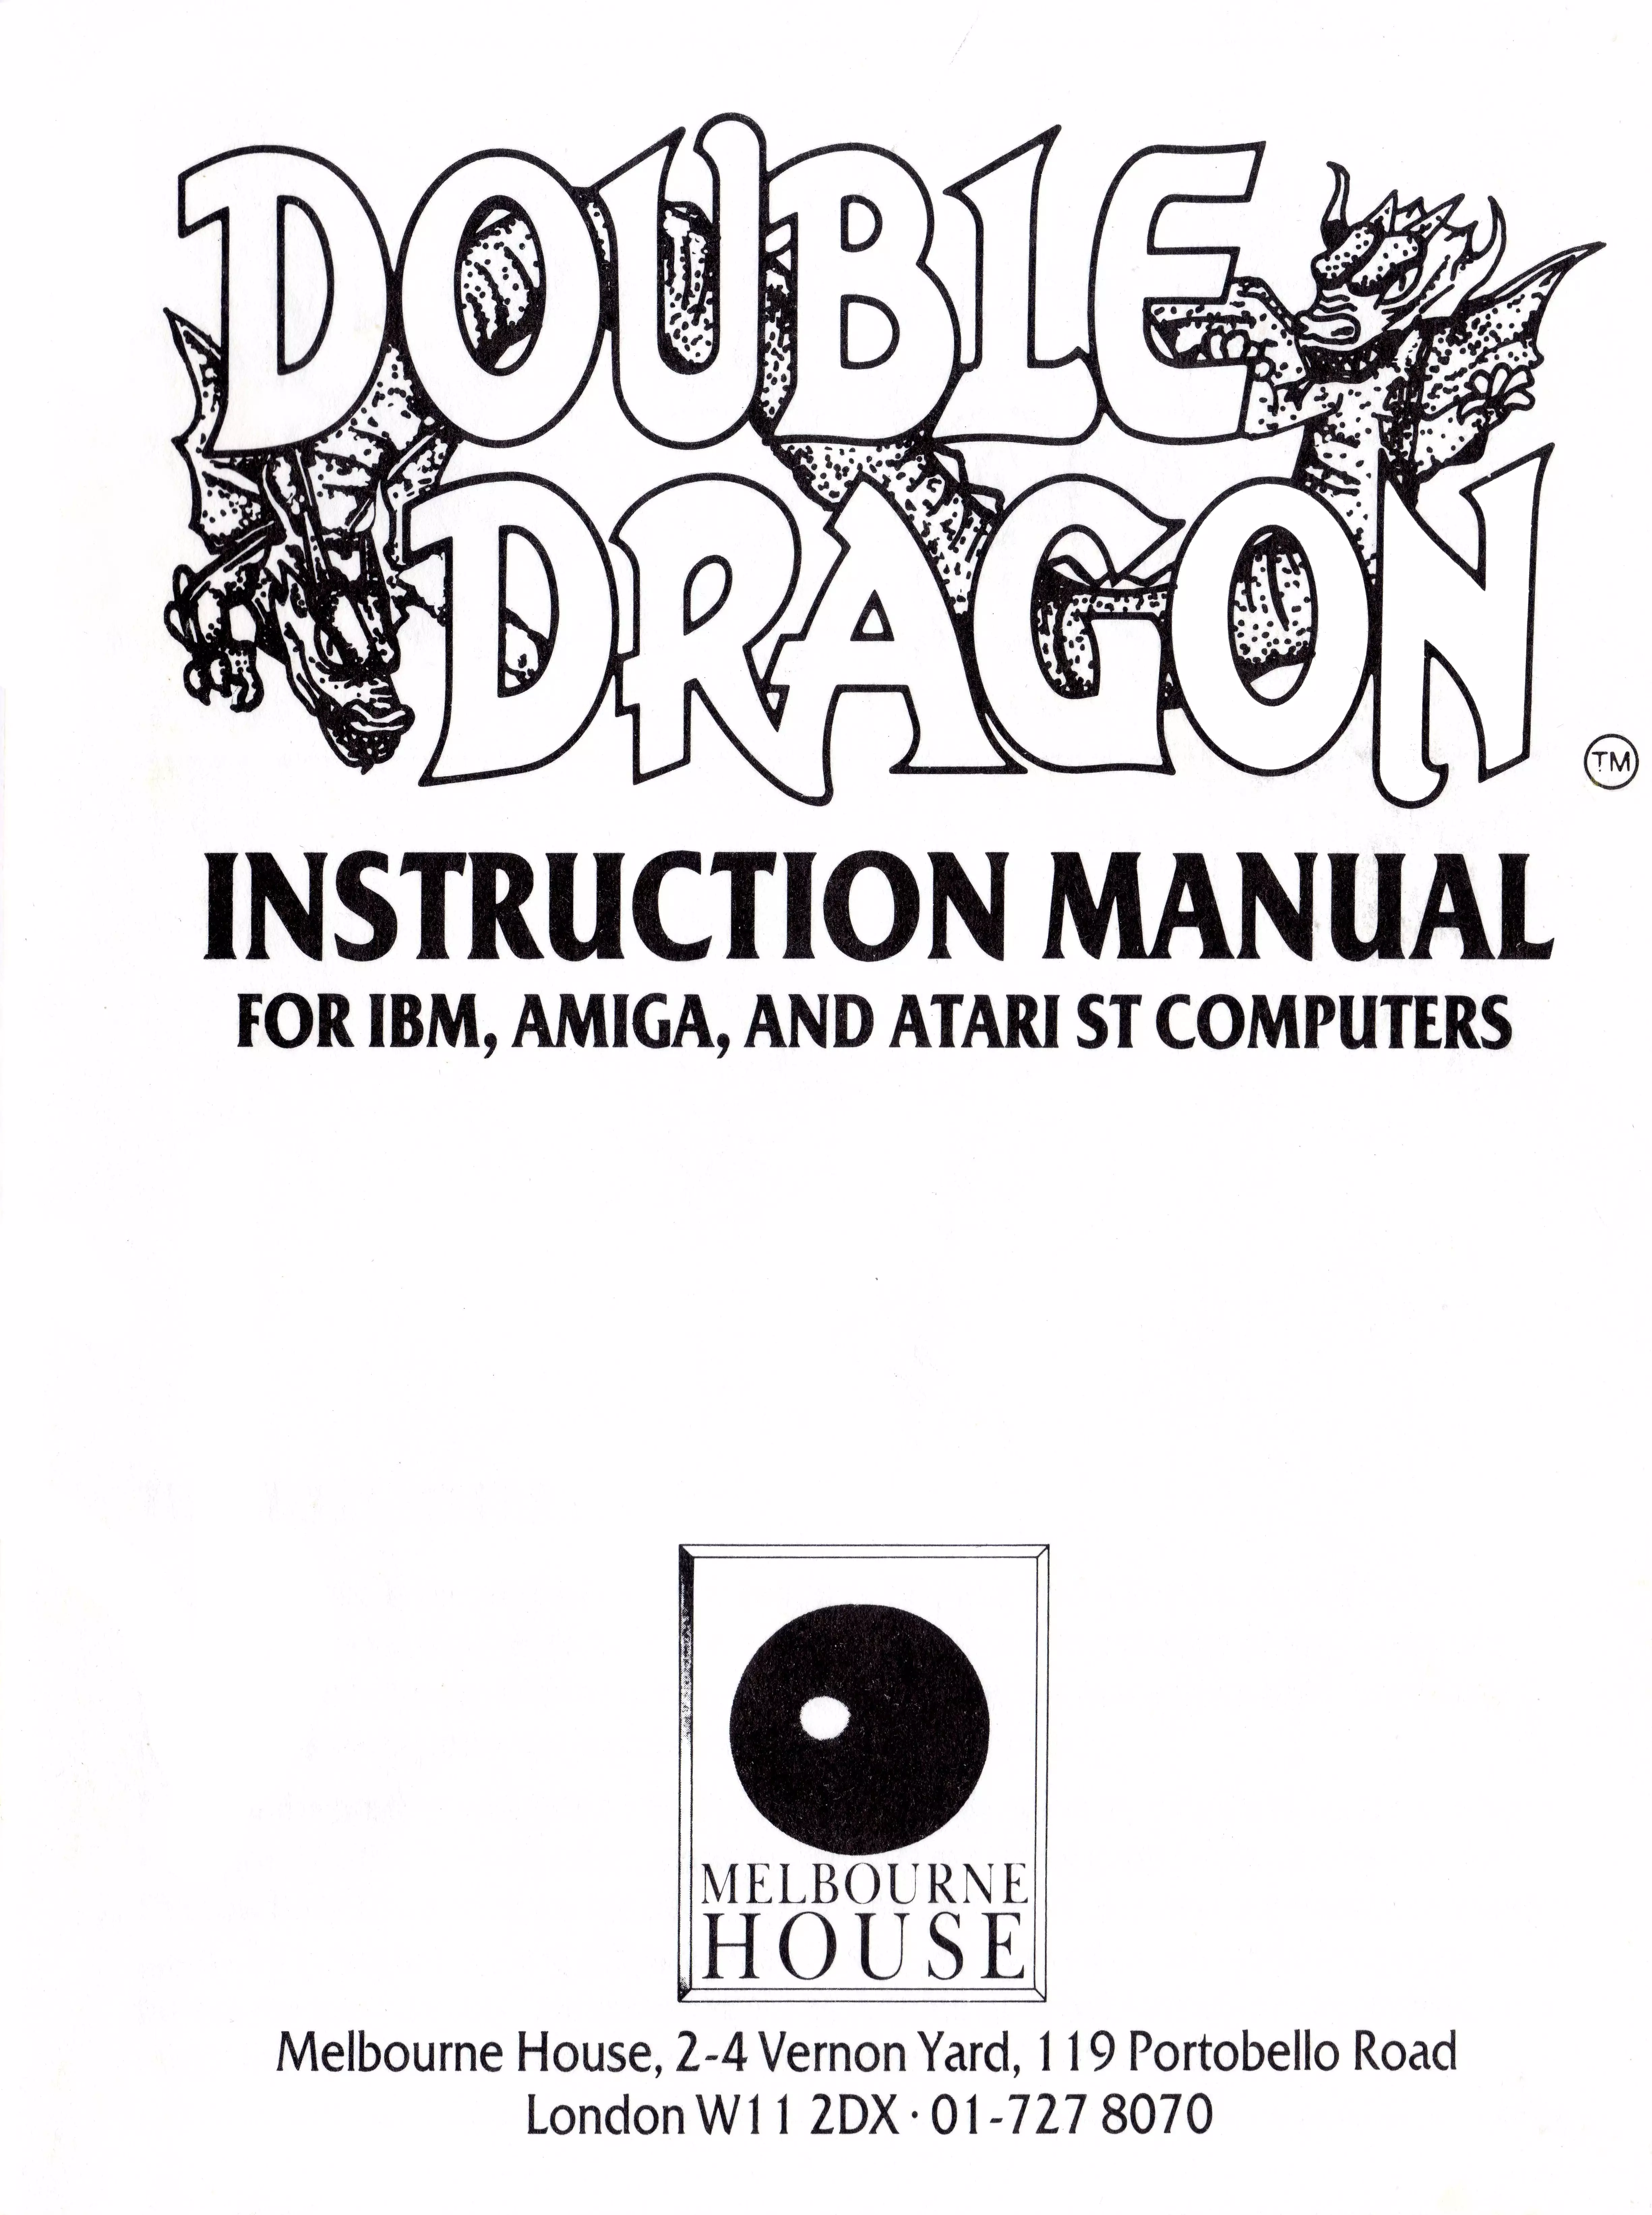 manual for Double Dragon